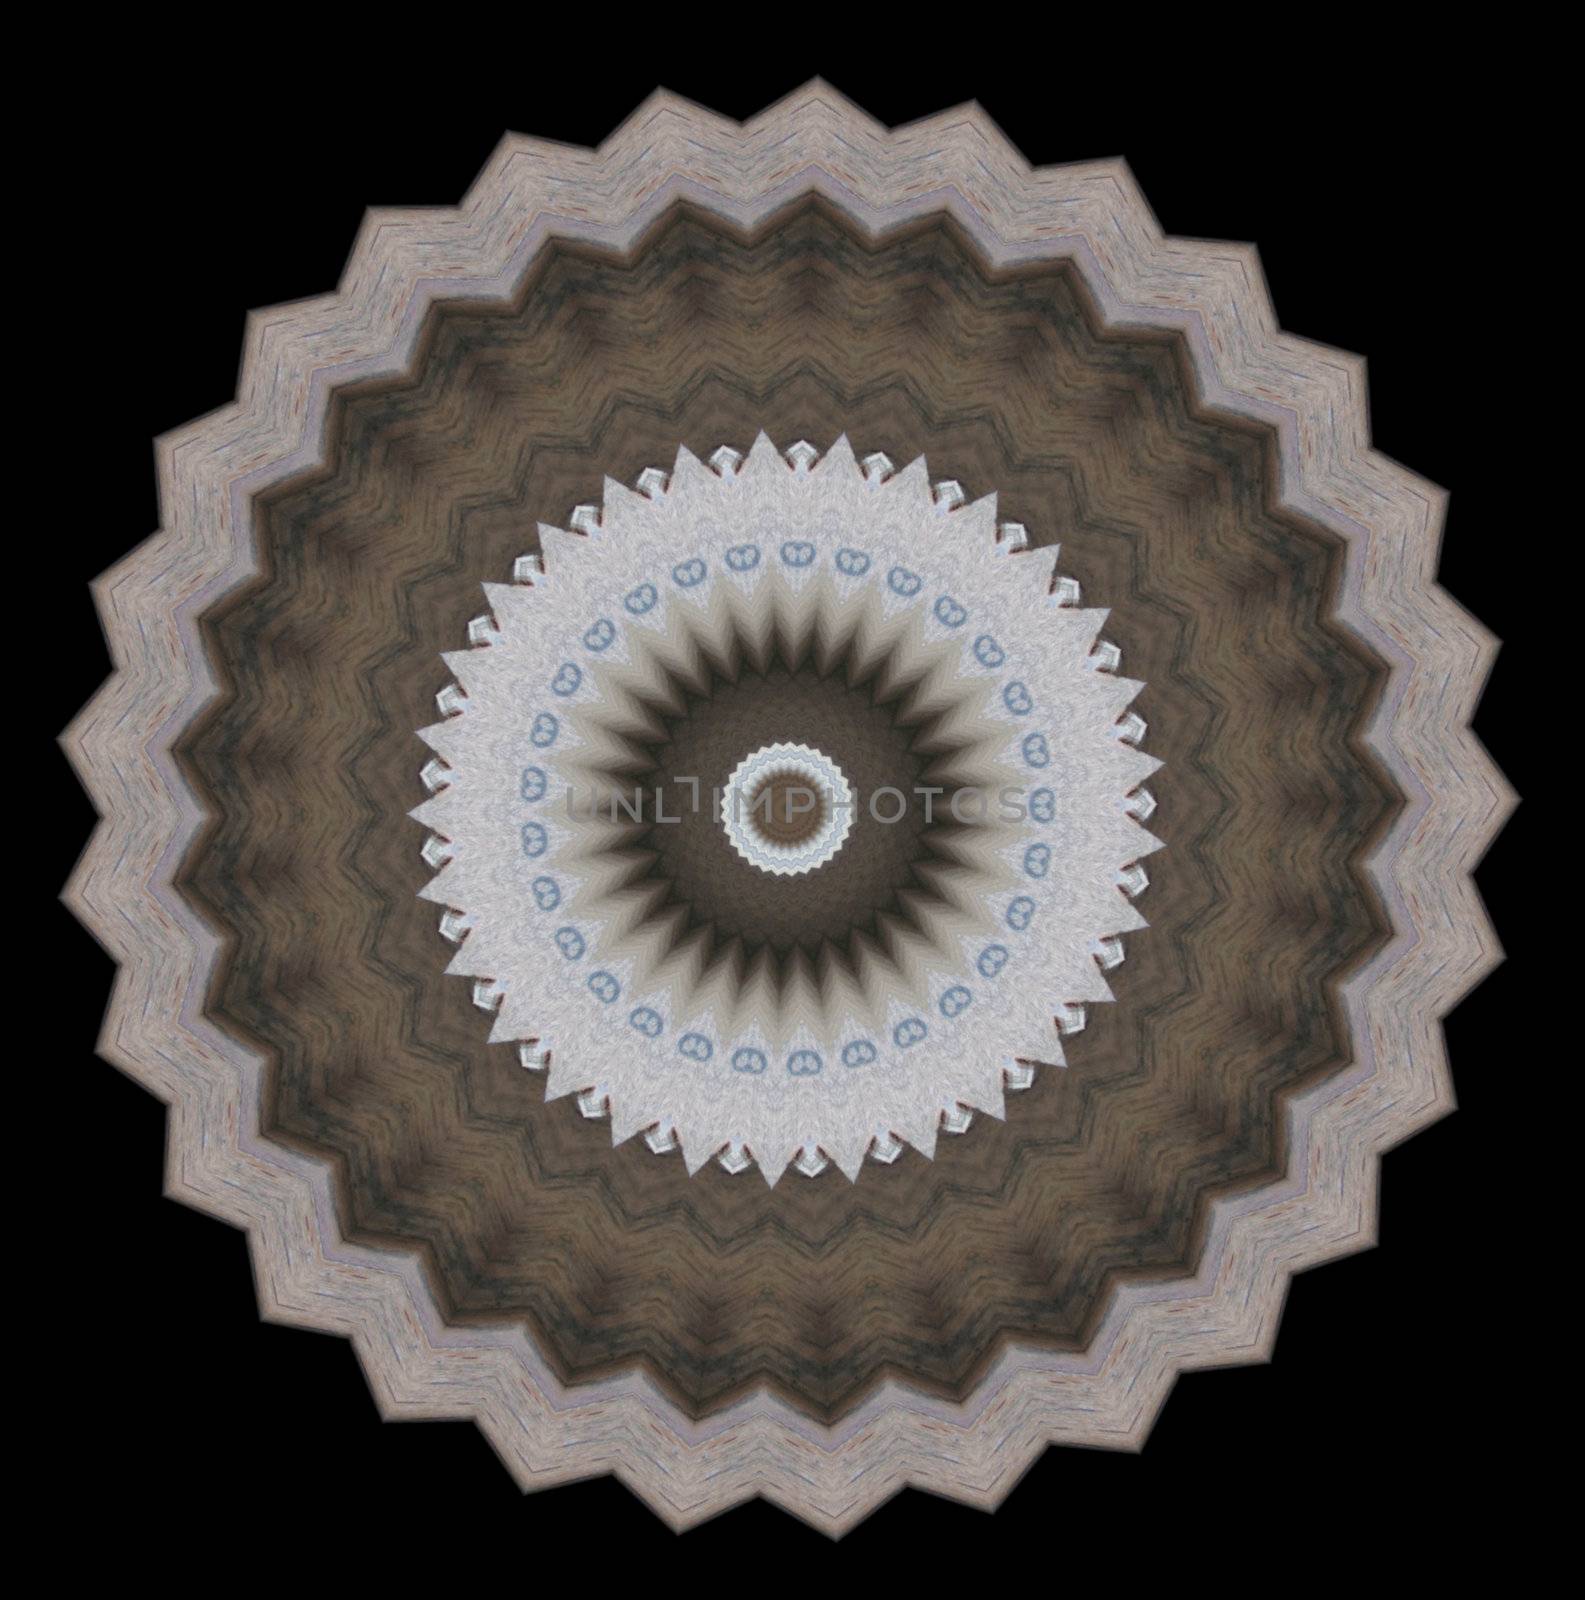 complex circular abstract image in grays and light browns